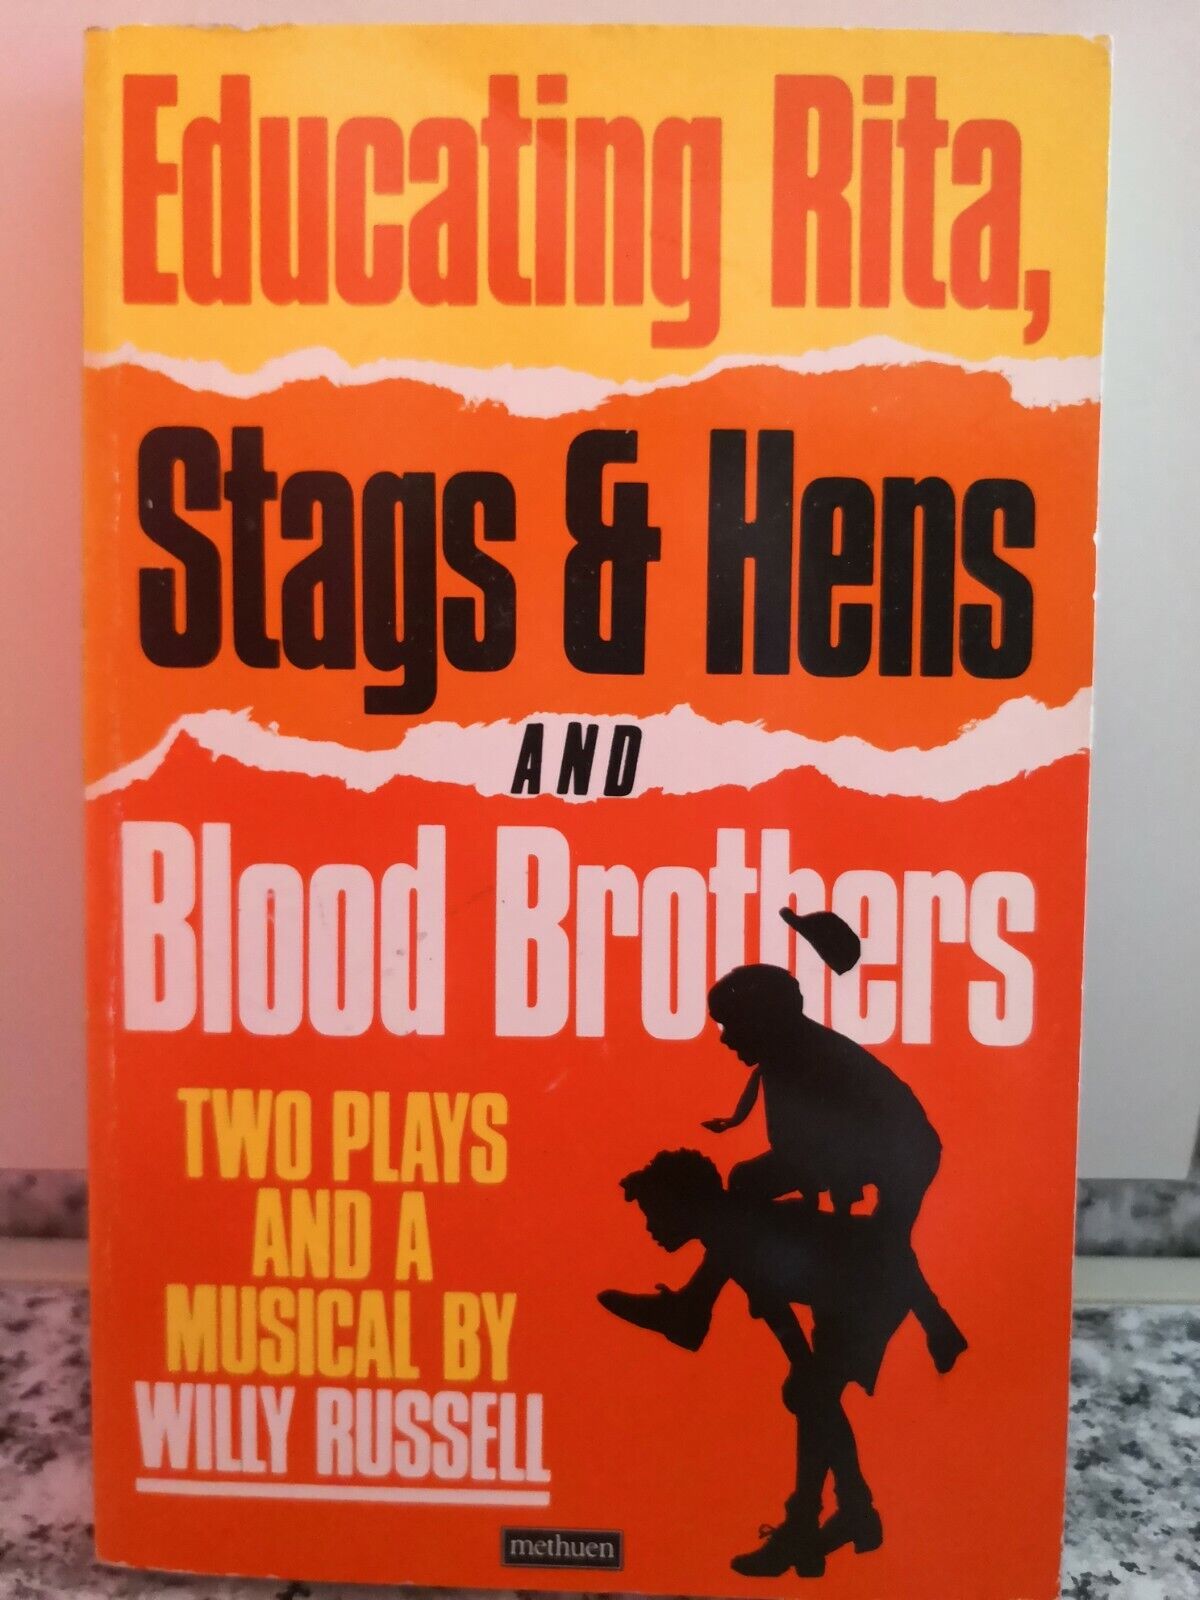 Educating Rita, Stags and Hens and Blood Brothers  di Willy Russell,  1986, -F